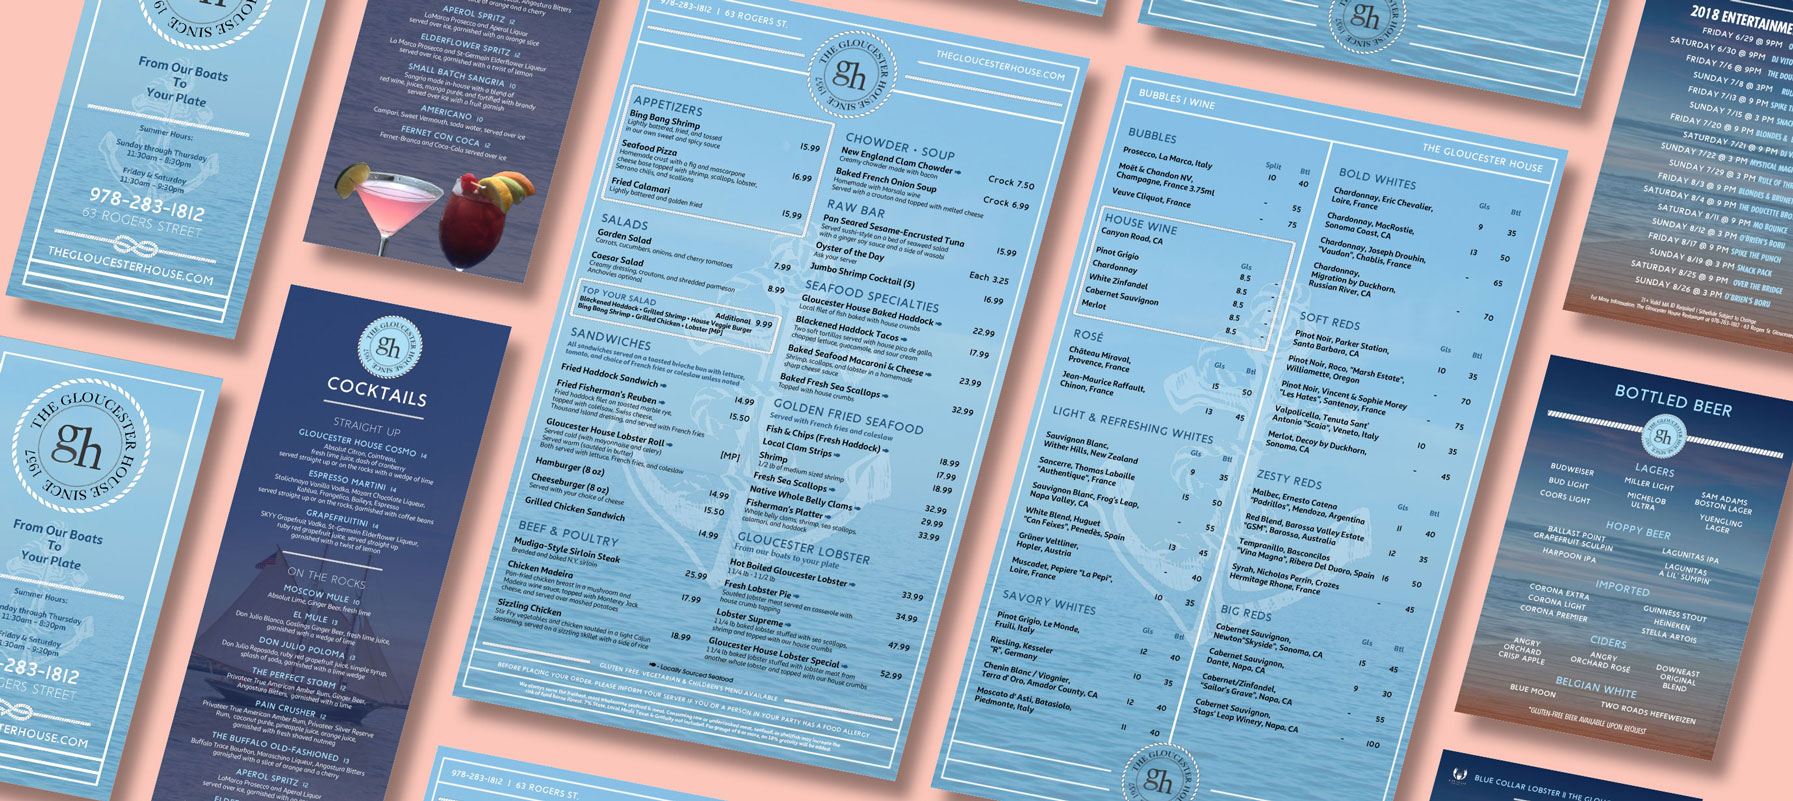 Graphic Design for dine-in, takeout and specialty menus